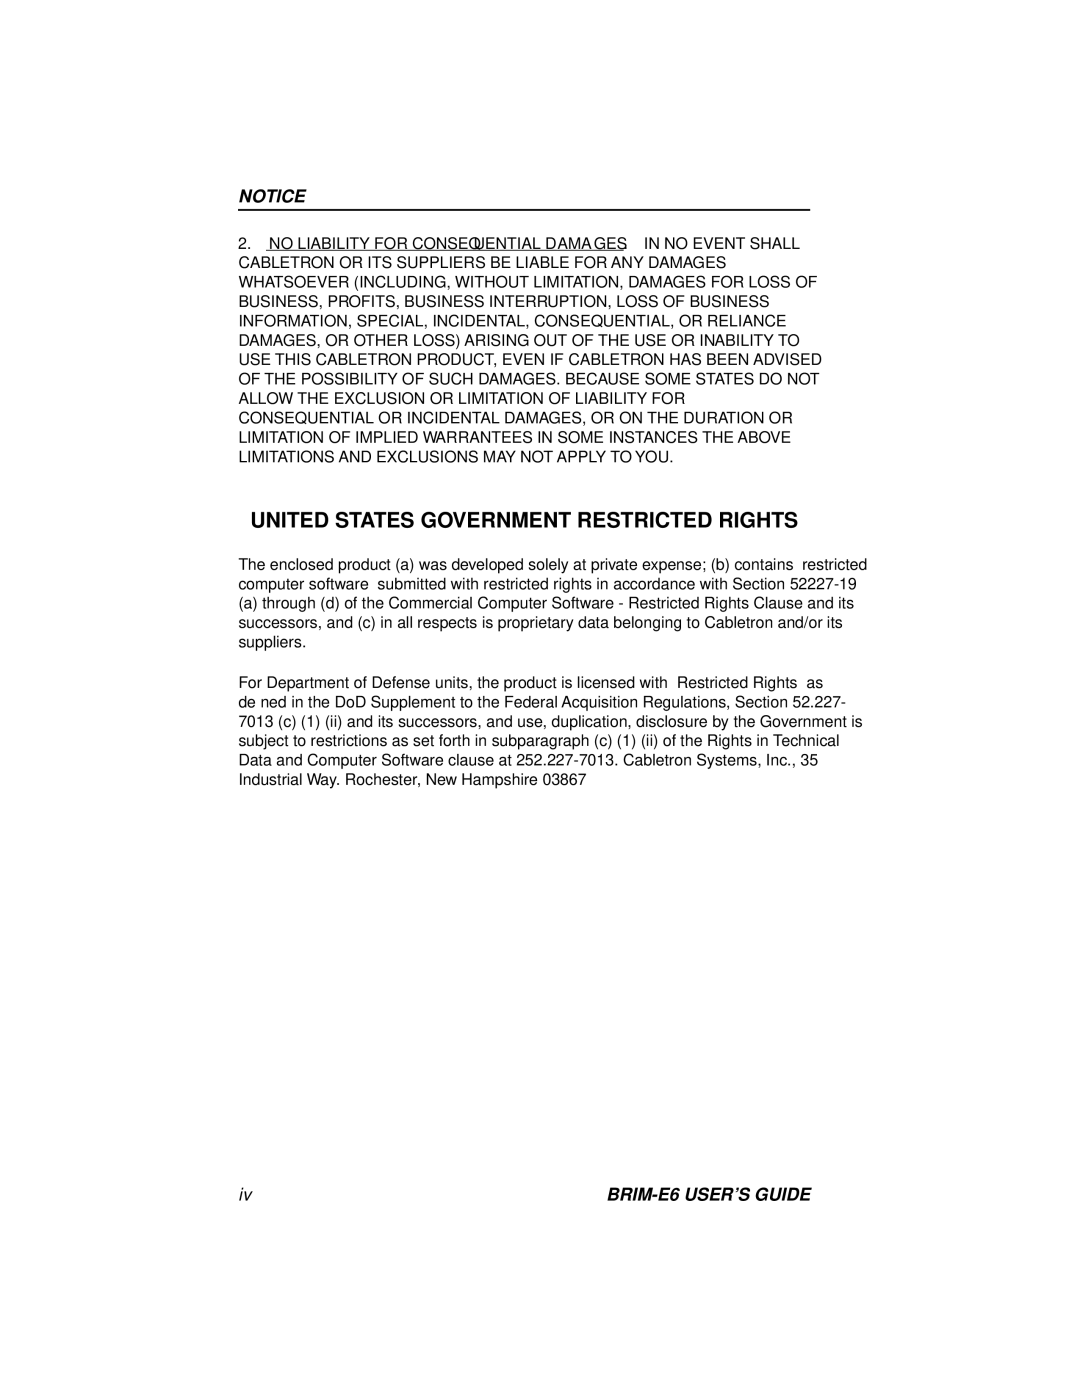 Enterasys Networks BRIM-E6 manual United States Government Restricted Rights 